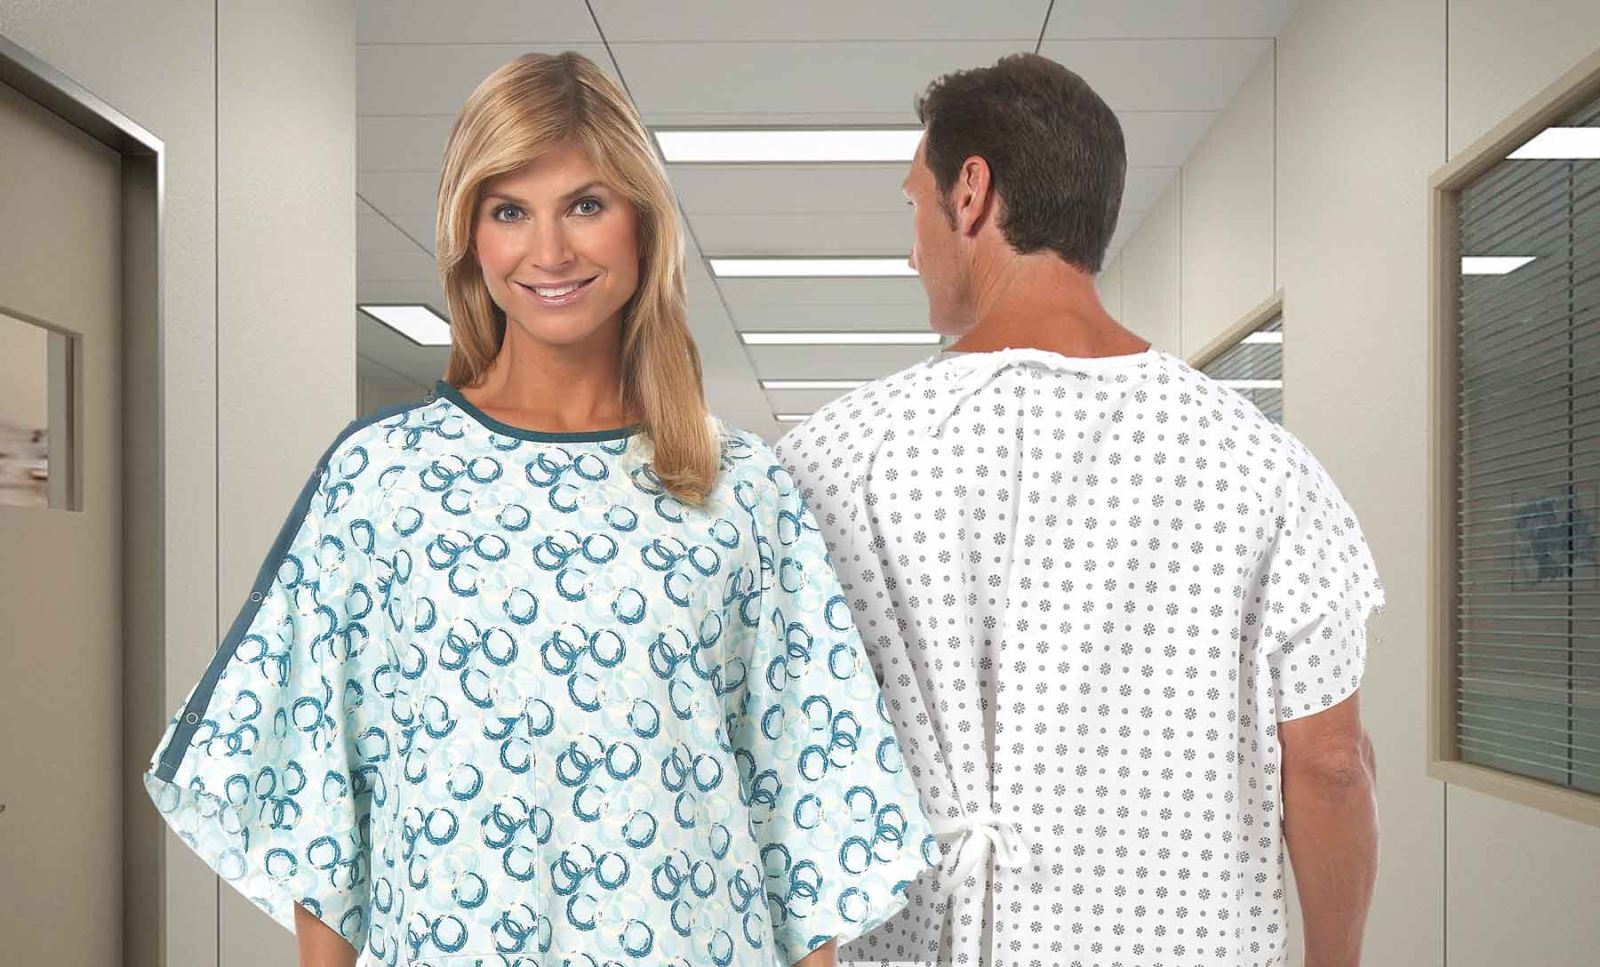 Hospital Gowns Image